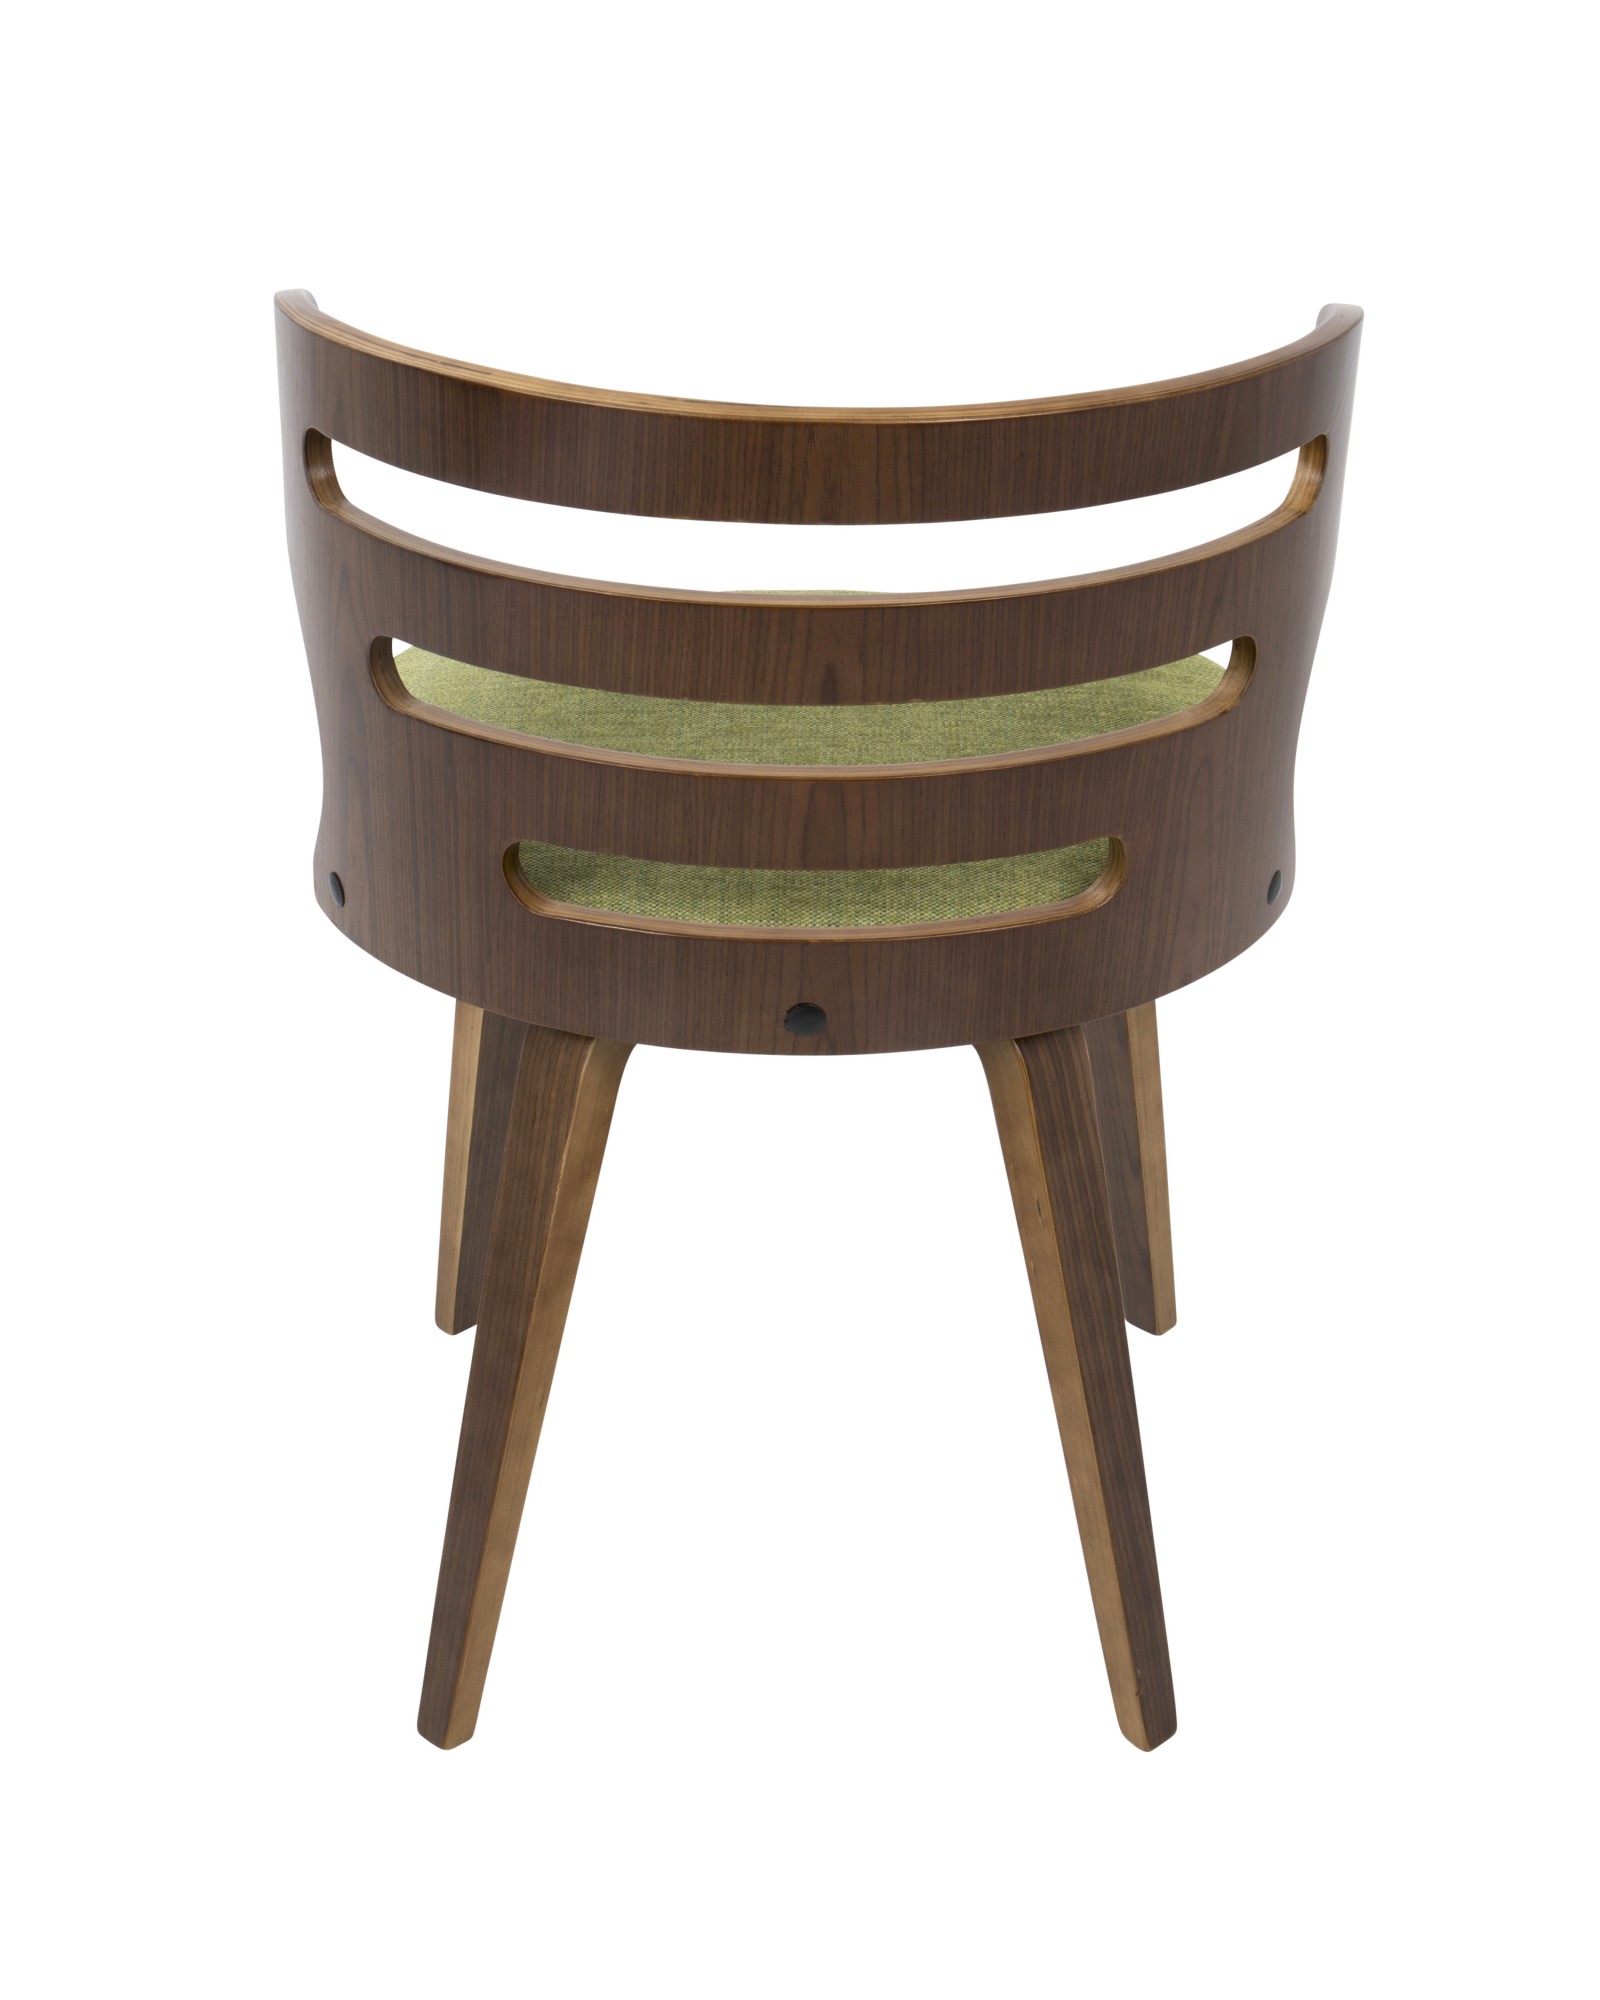 Cosi Mid-Century Modern Dining/Accent Chair in Walnut and Green Fabric